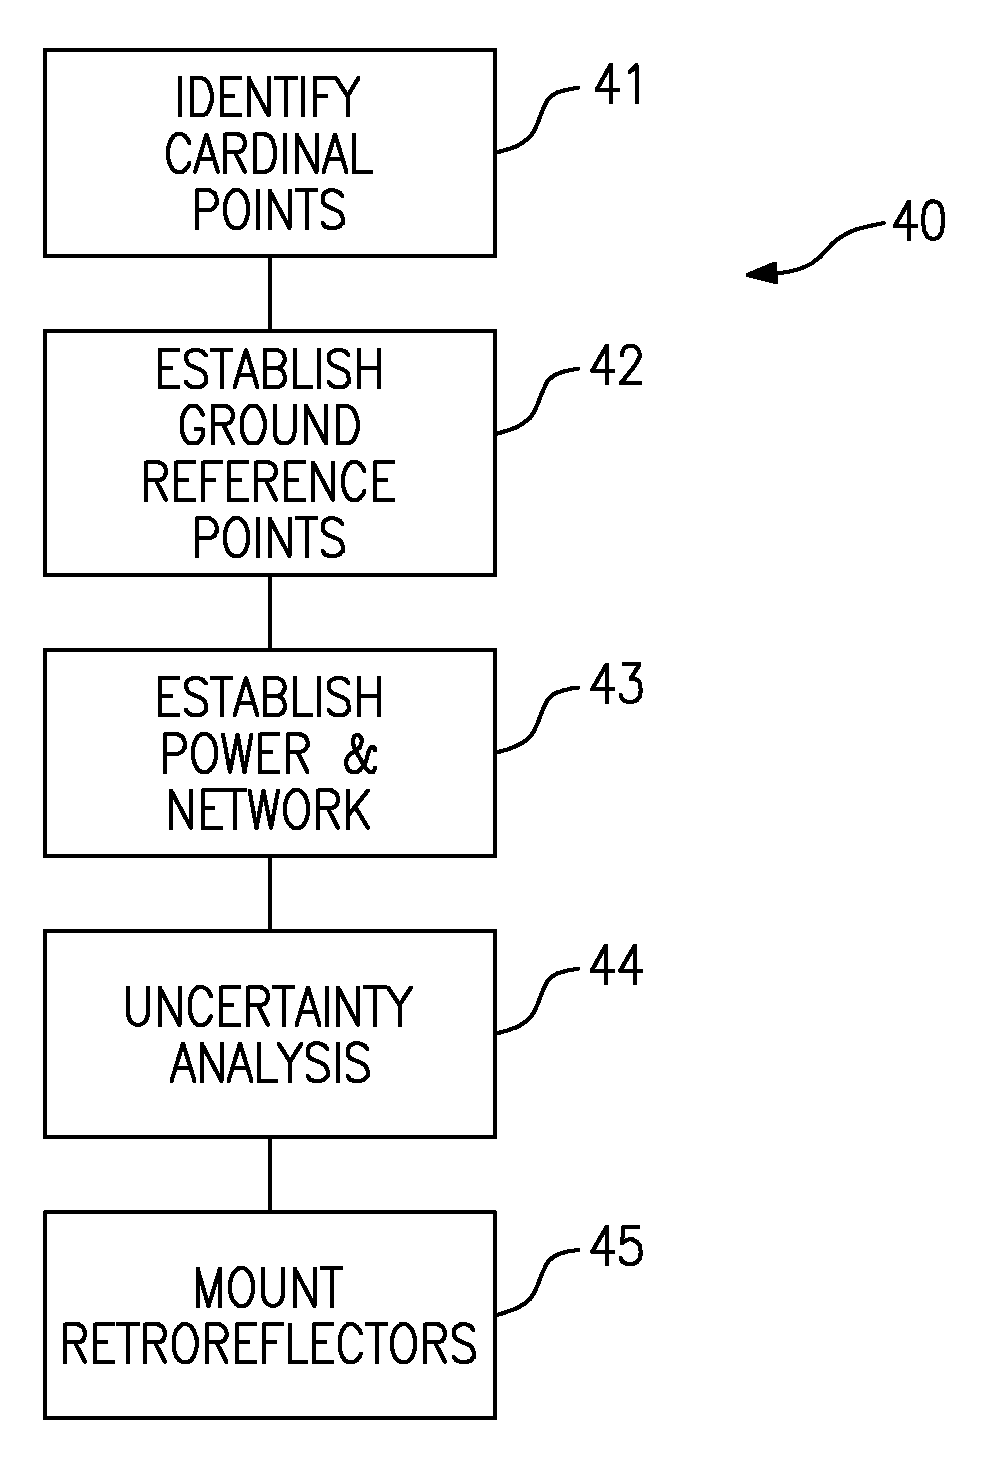 Method for measuring the structural health of a civil structure